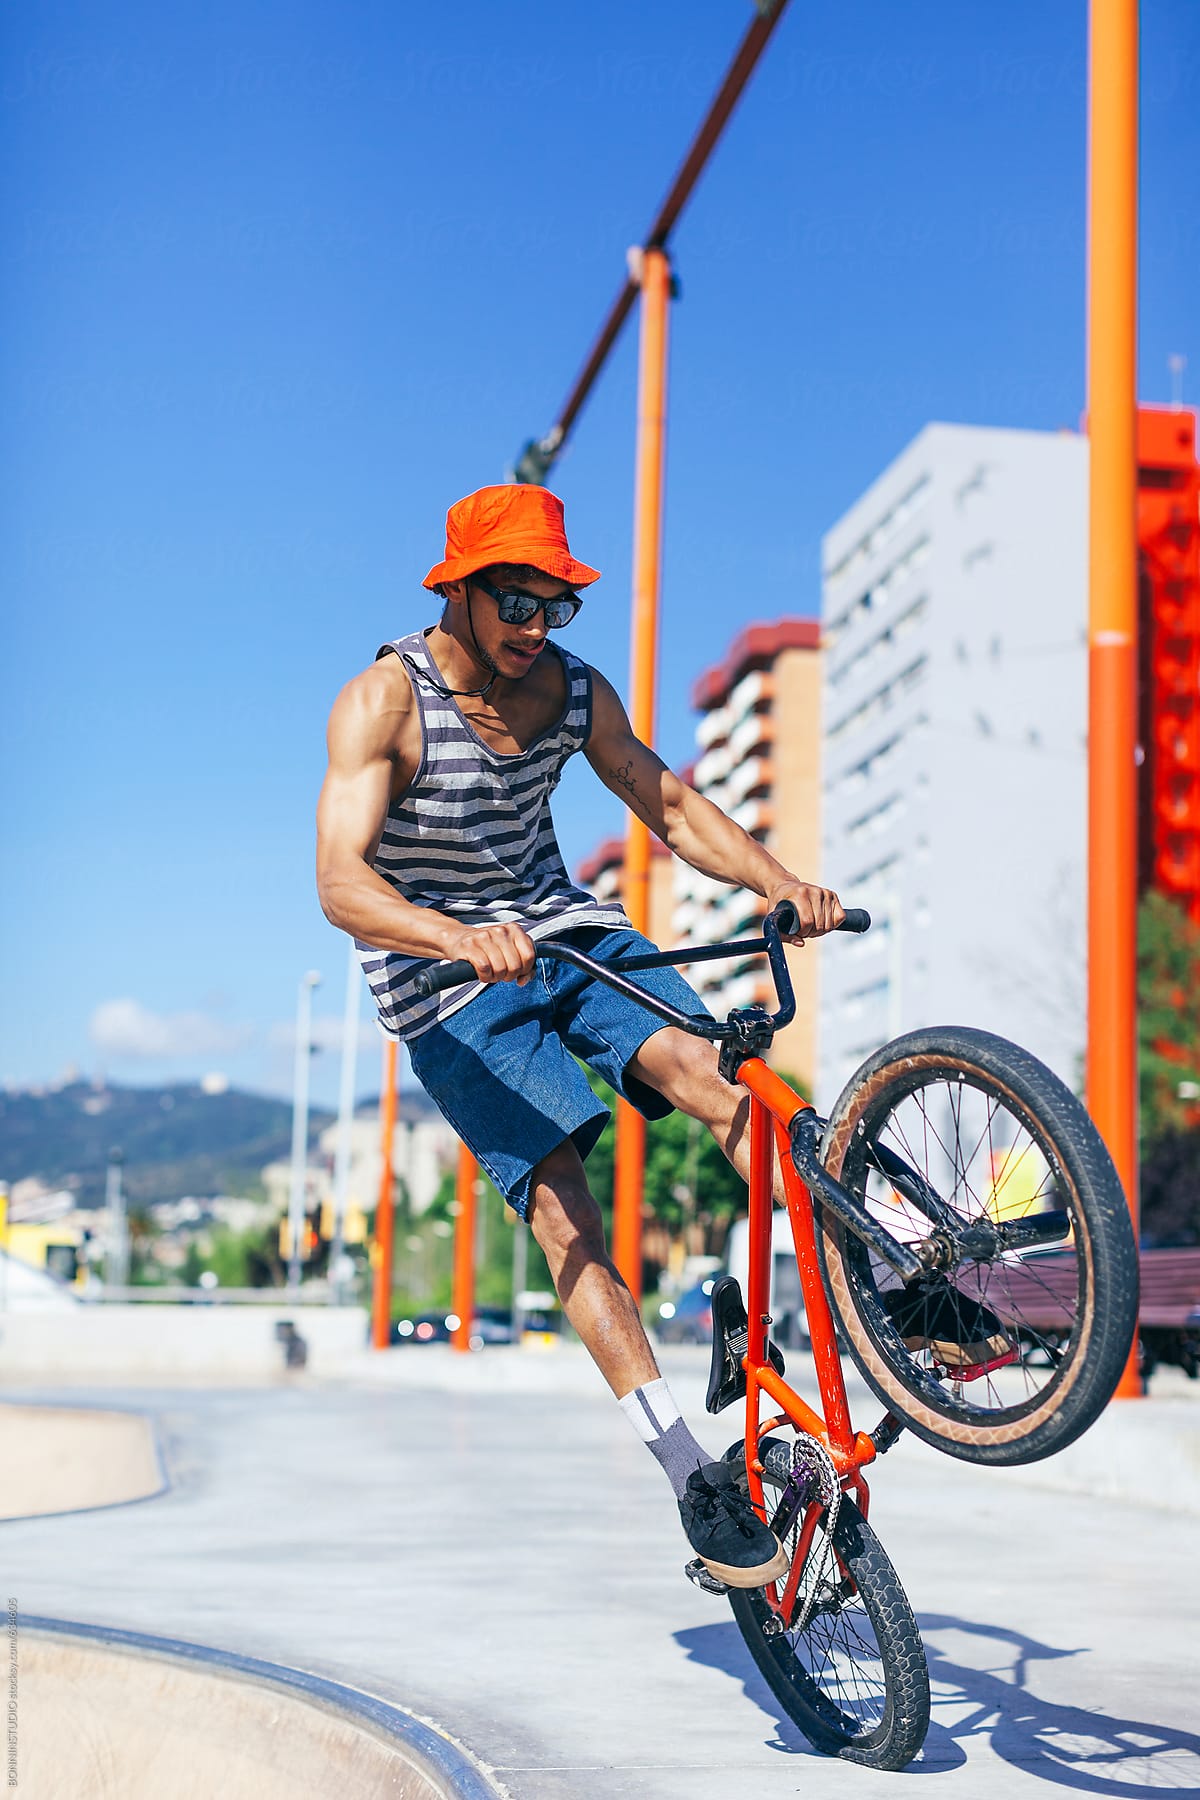 Young man jumping with BMX bike.